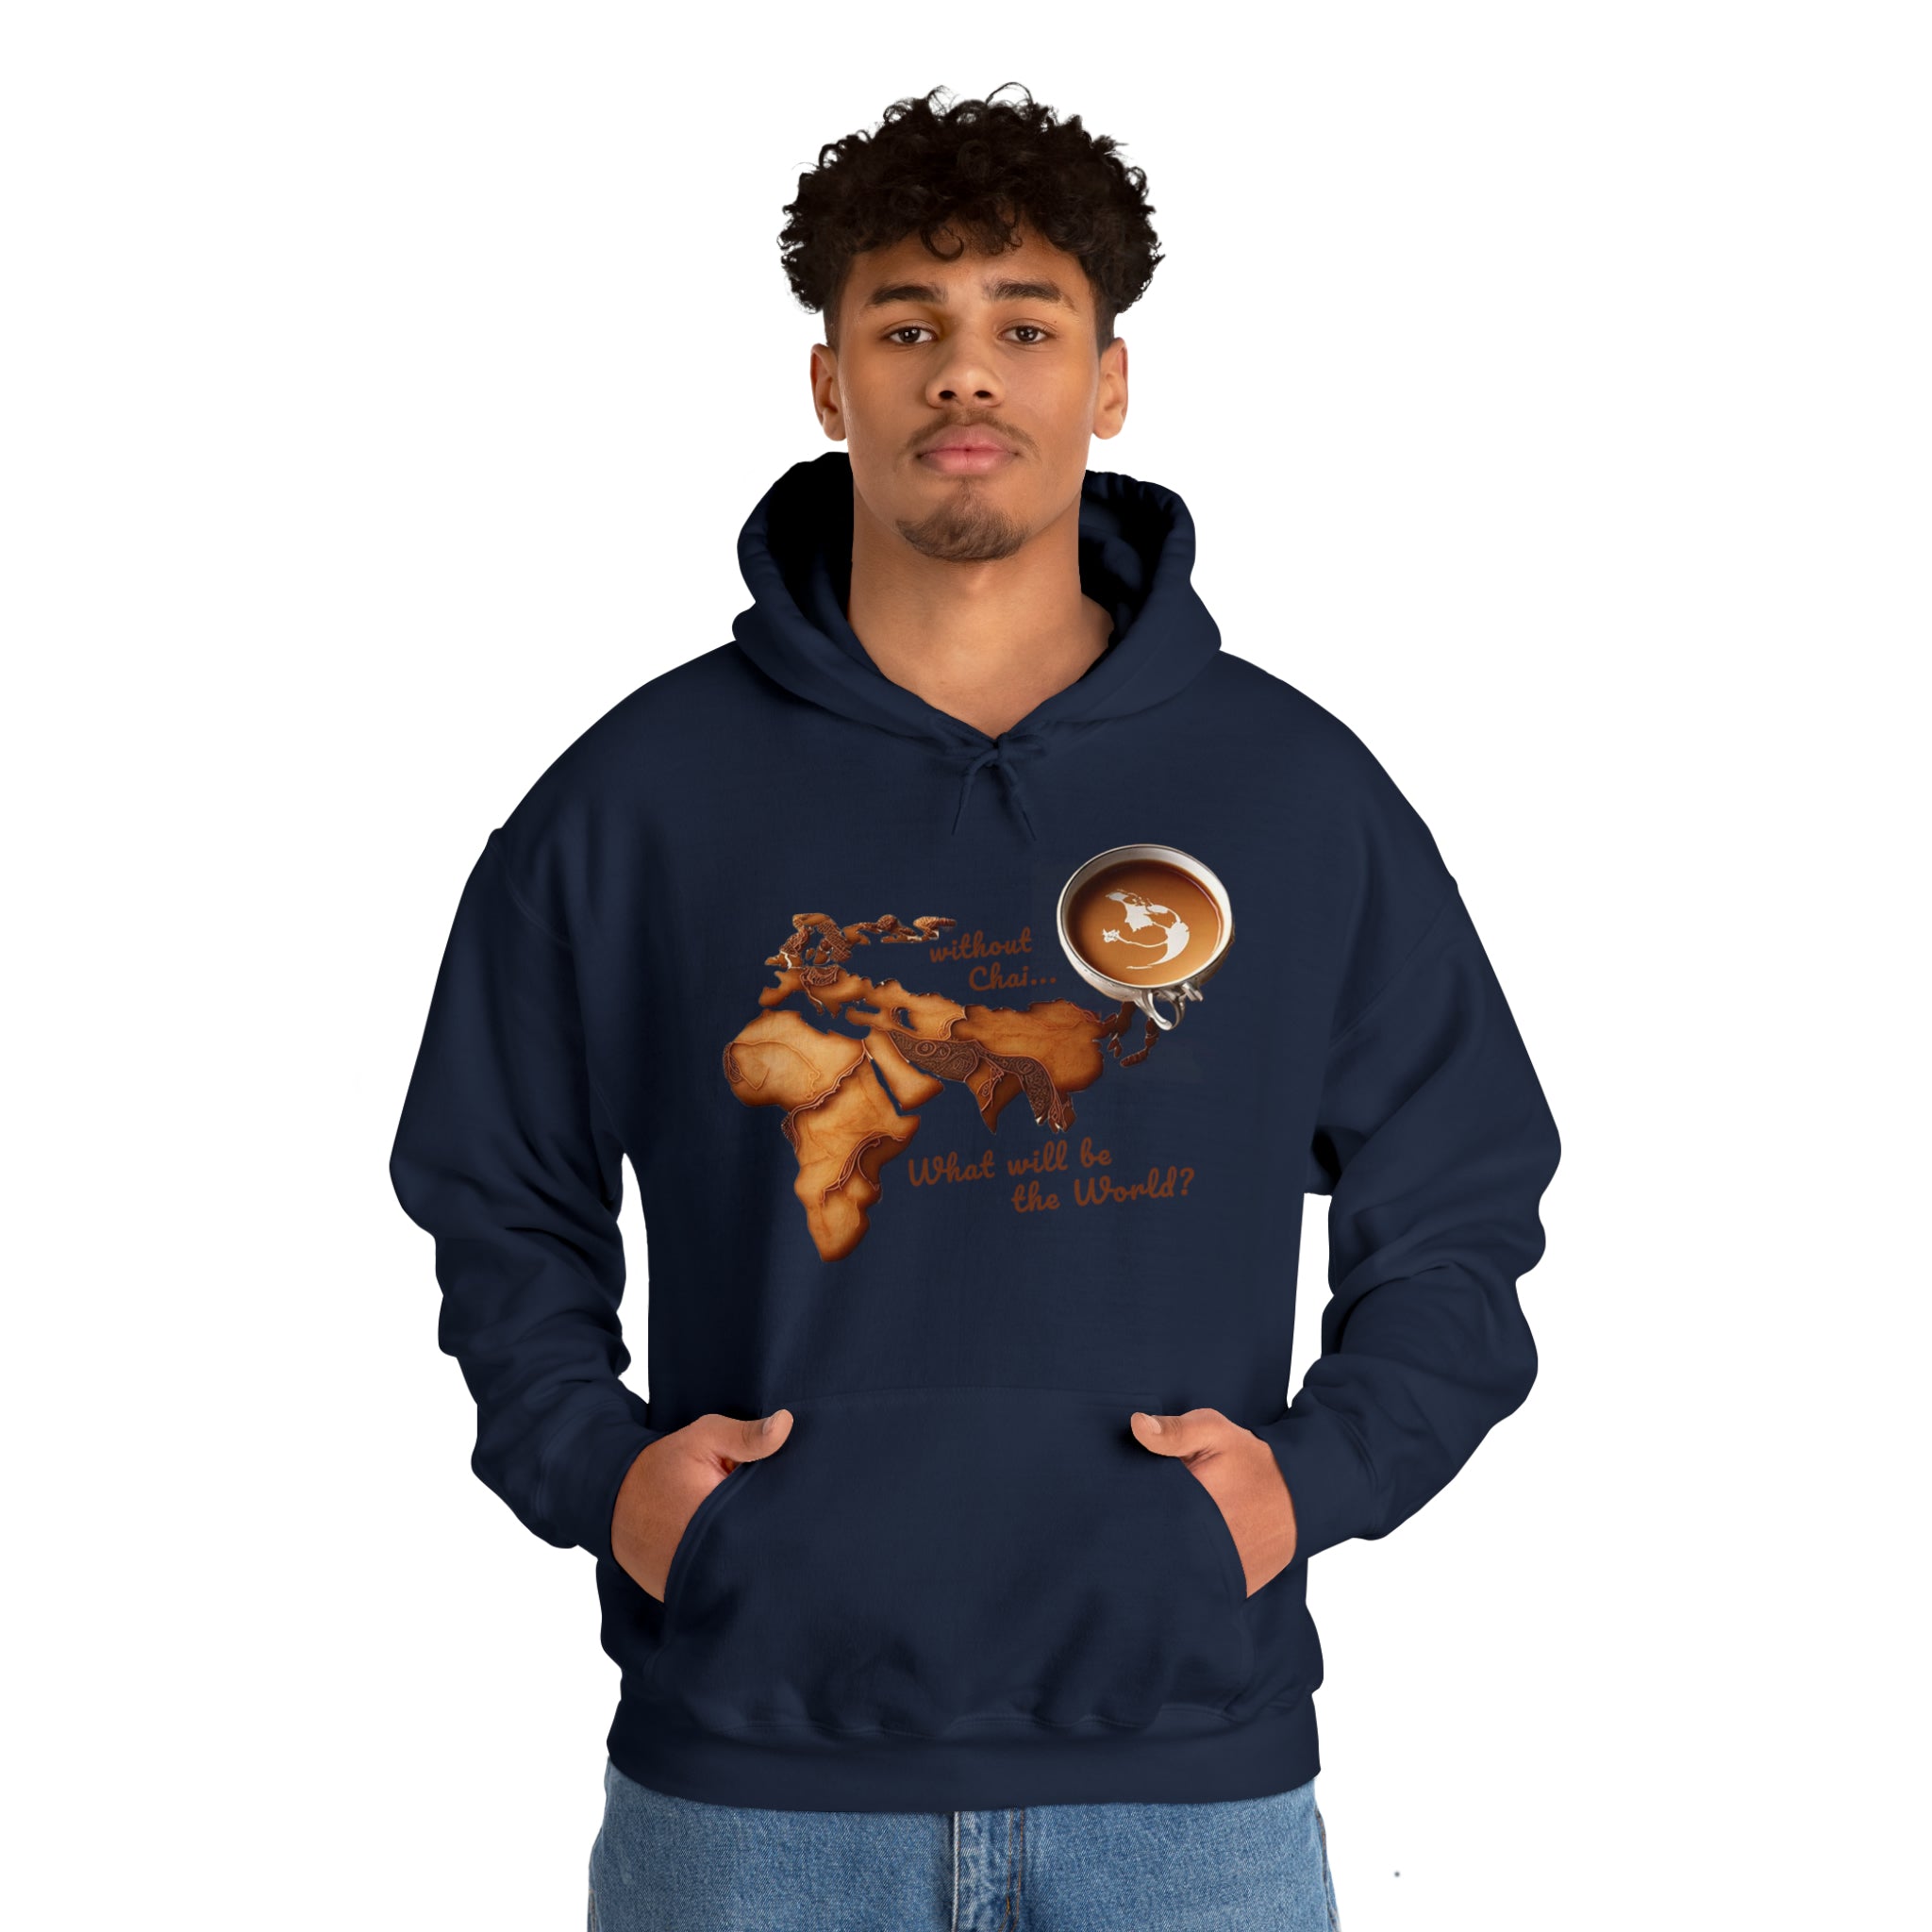 What Would The World Be. Without Chai? Unisex Heavy Blend Hooded Sweatshirt